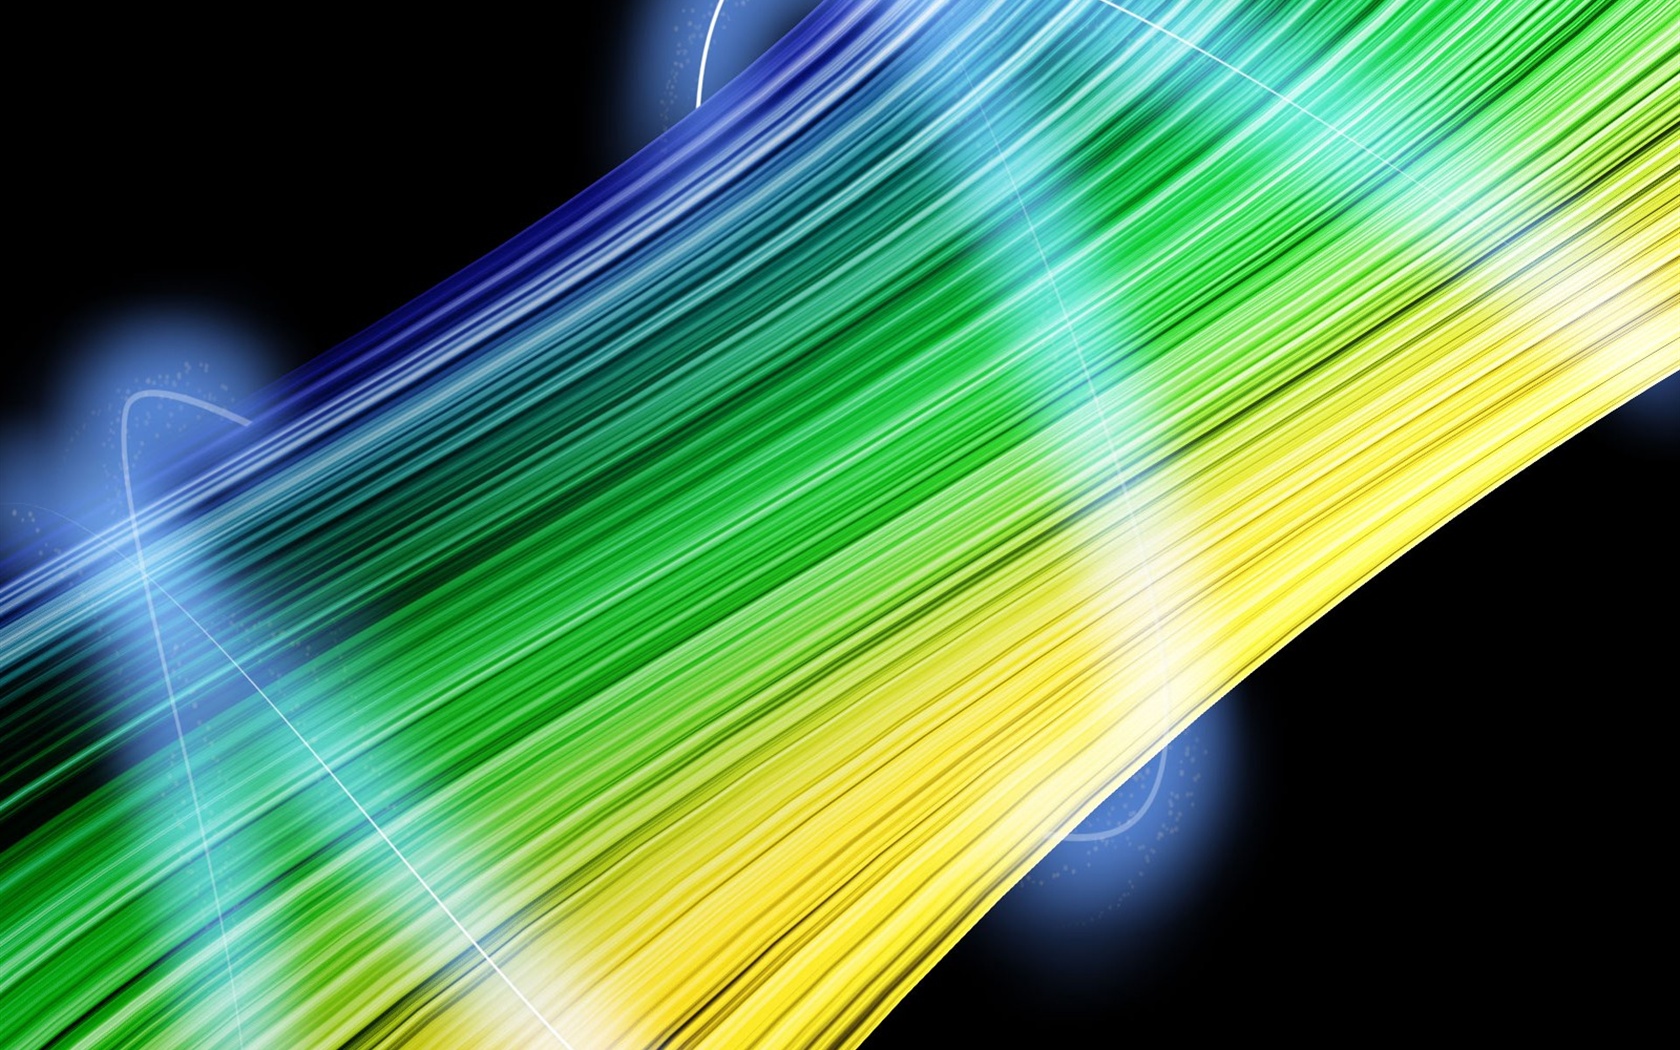 Abstract Green And Yellow Lines 640x1136 IPhone 5 5S 5C SE Wallpaper, Background, Picture, Image